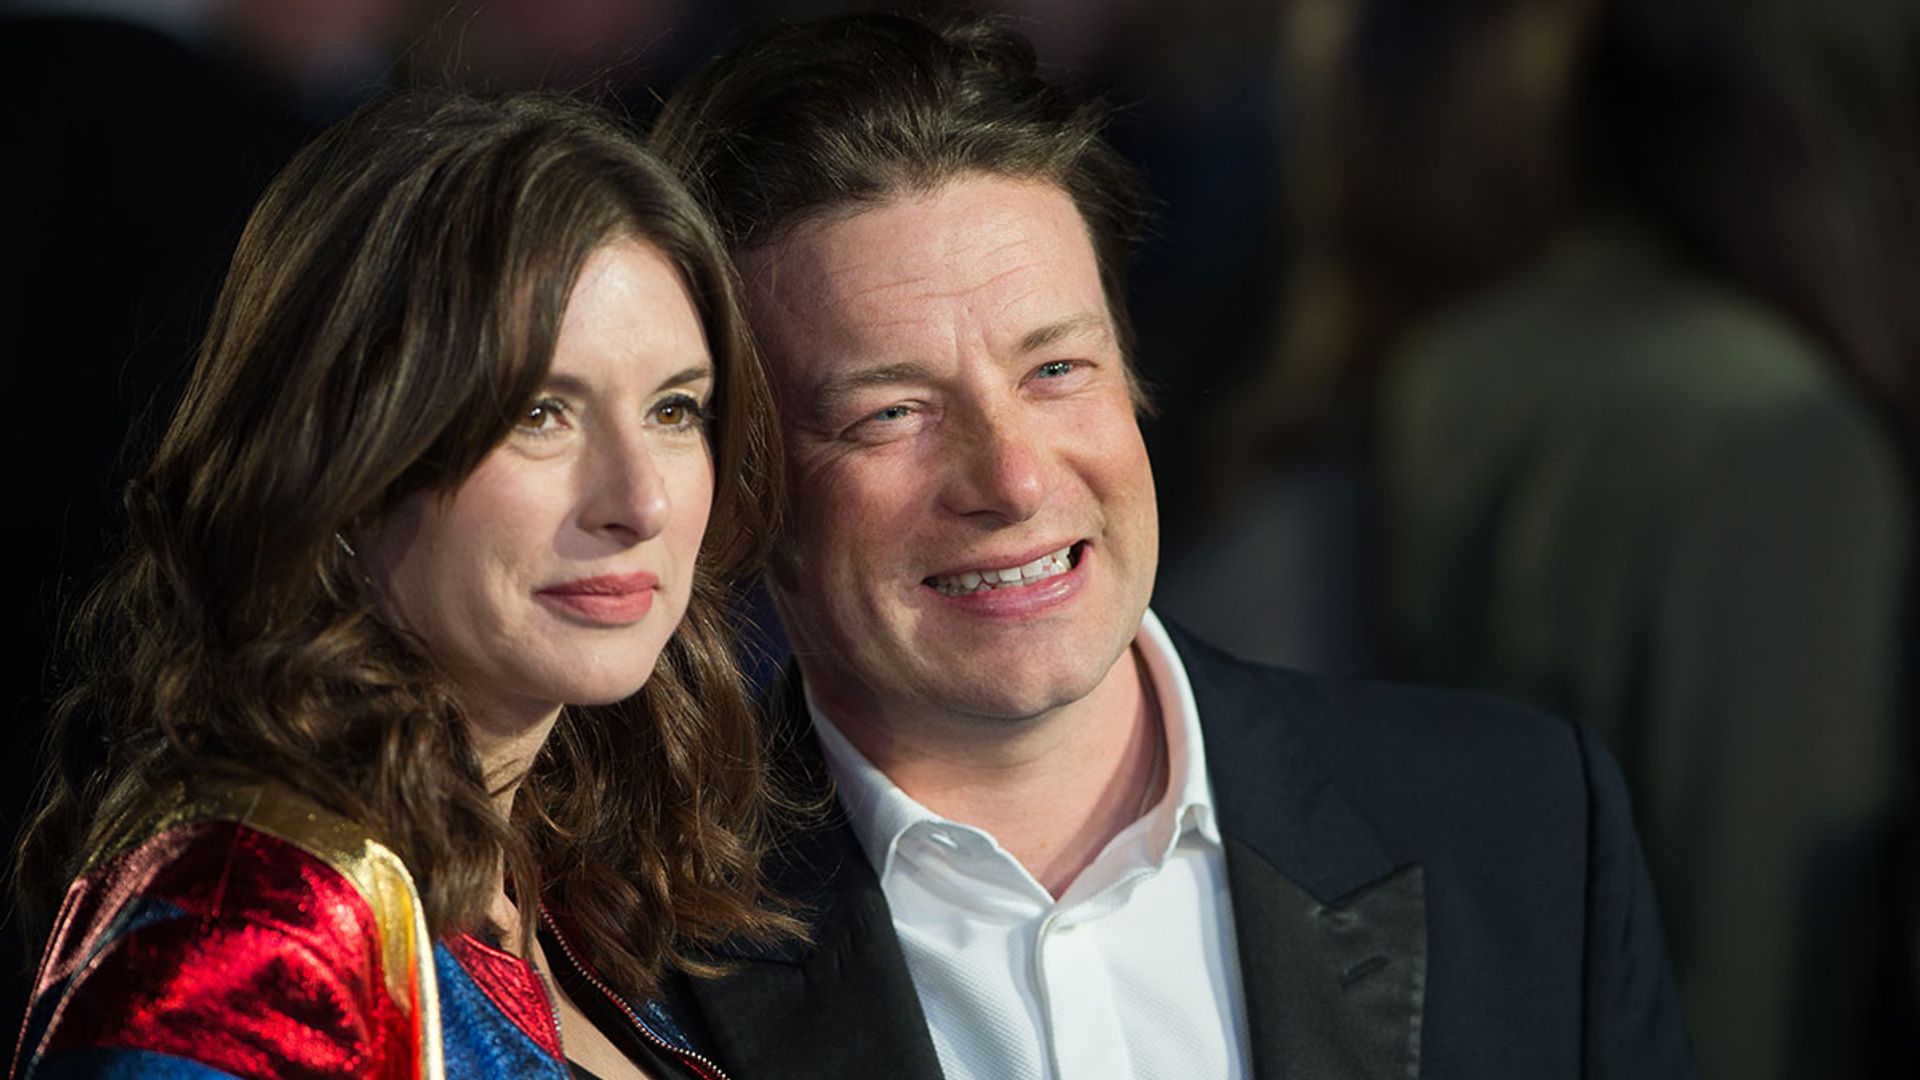 Jamie Oliver cosies up to wife Jools in new photo to mark special occasion